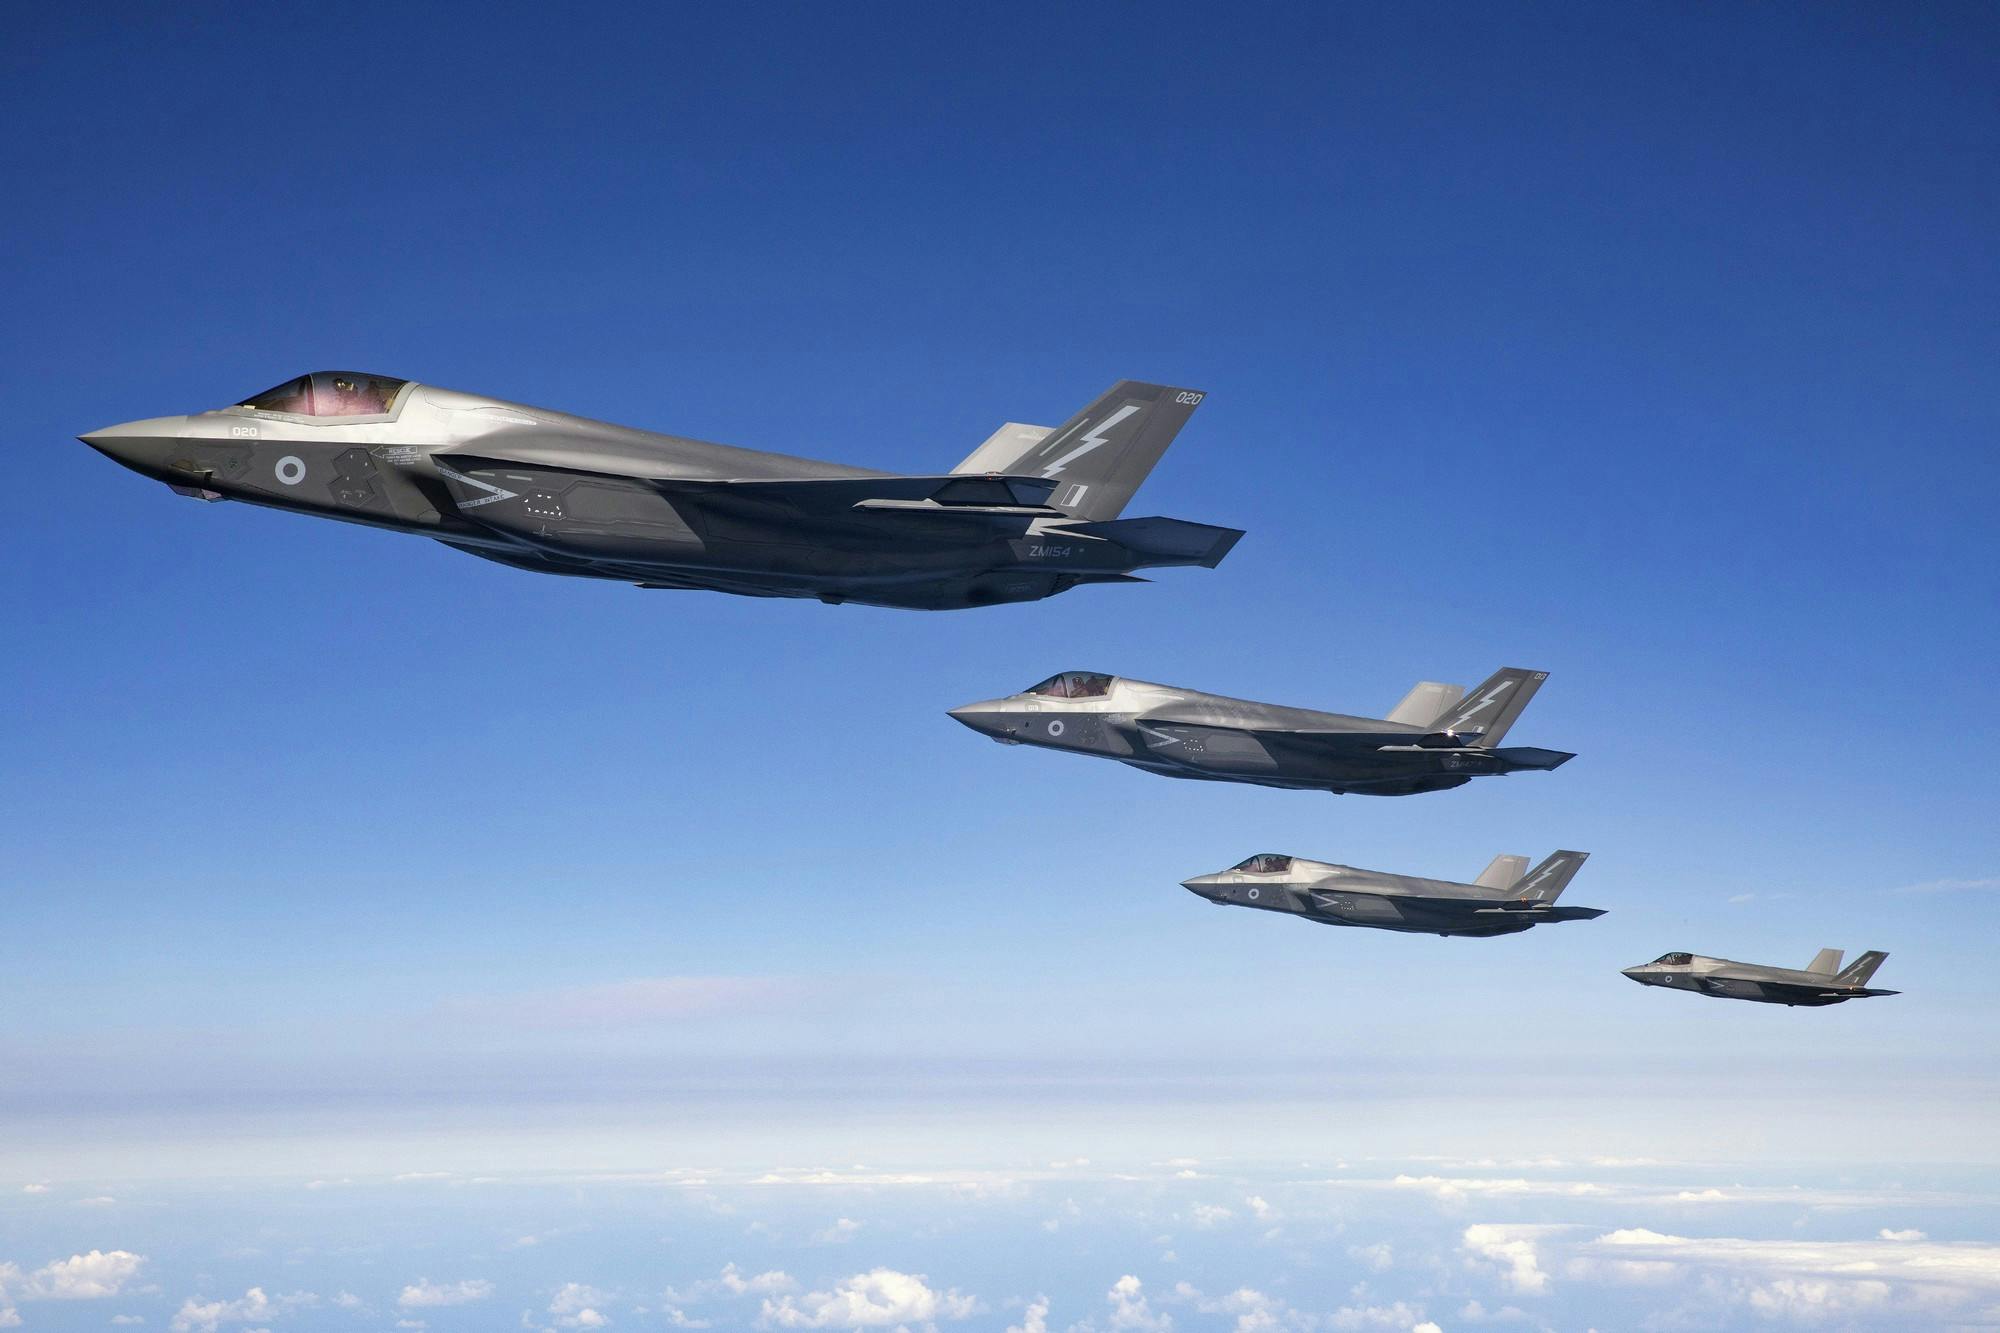 UK ‘absolutely committed’ to buying more than 48 F-35 jets